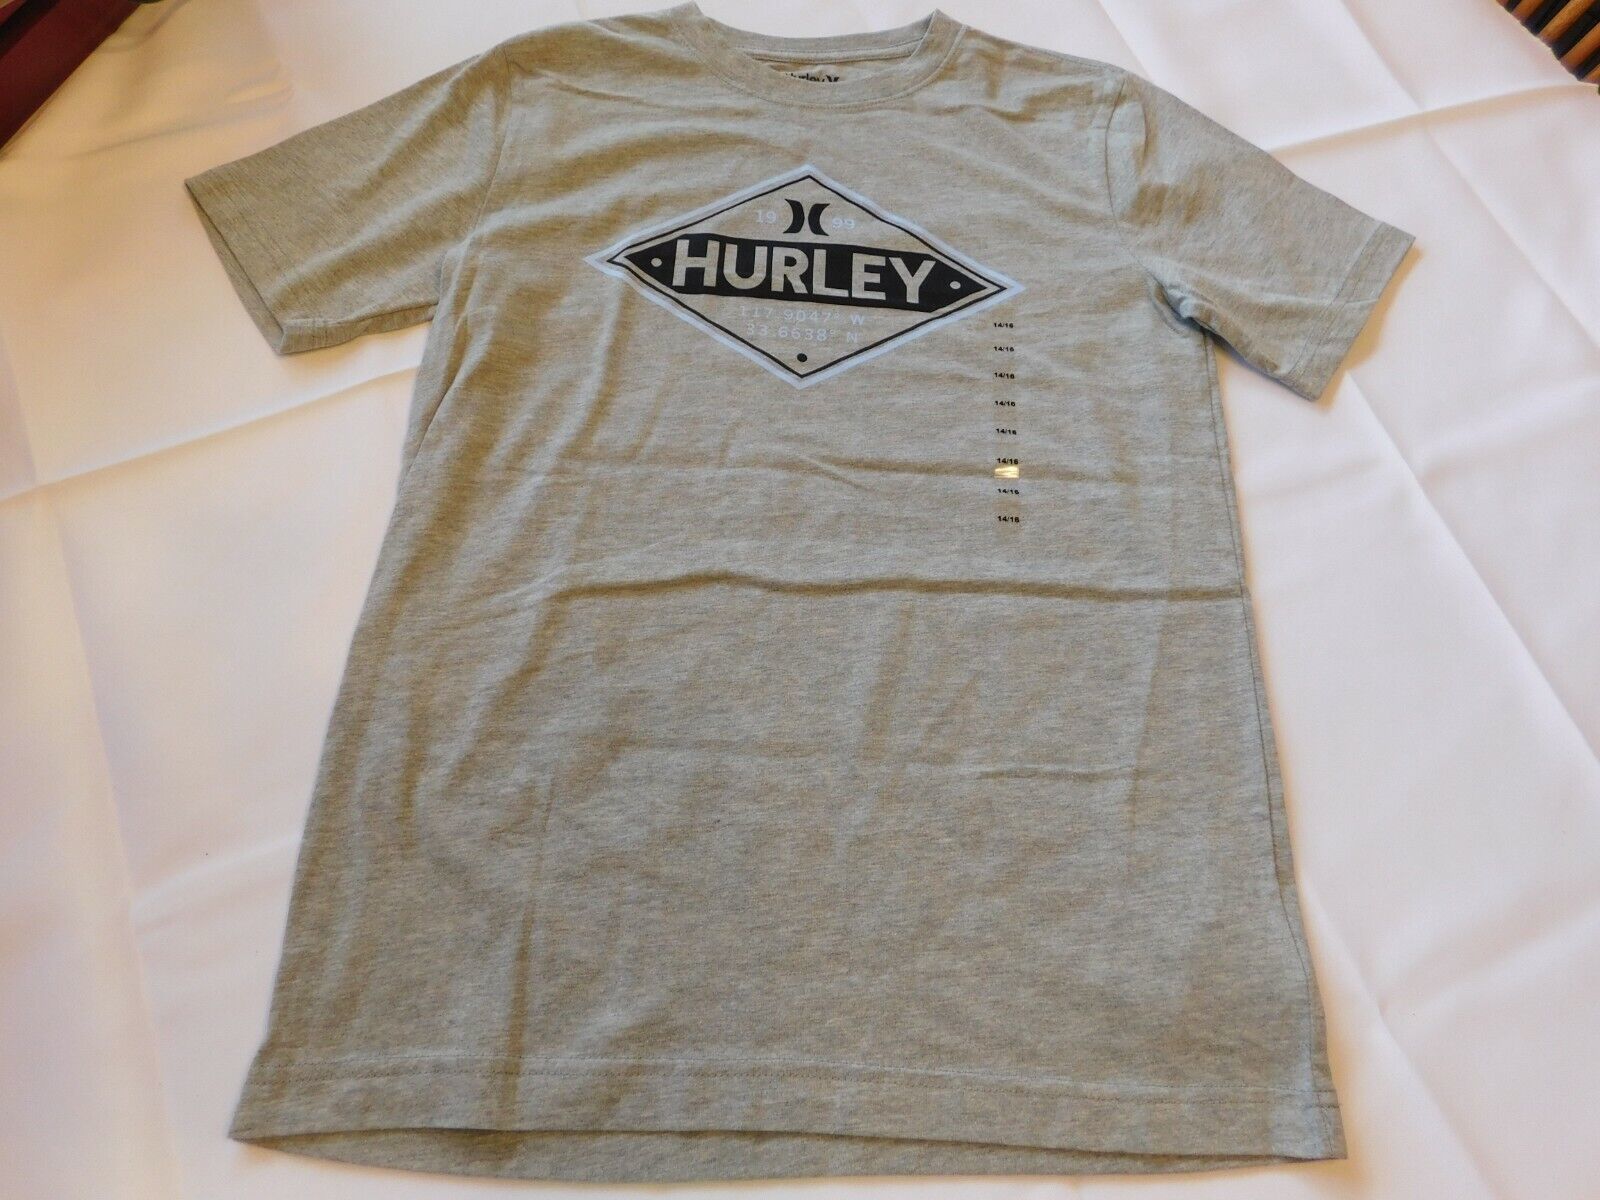 Primary image for Hurley Boy's Youth Short Sleeve T Shirt Grey Heather Size M 10-12 yrs NWOT